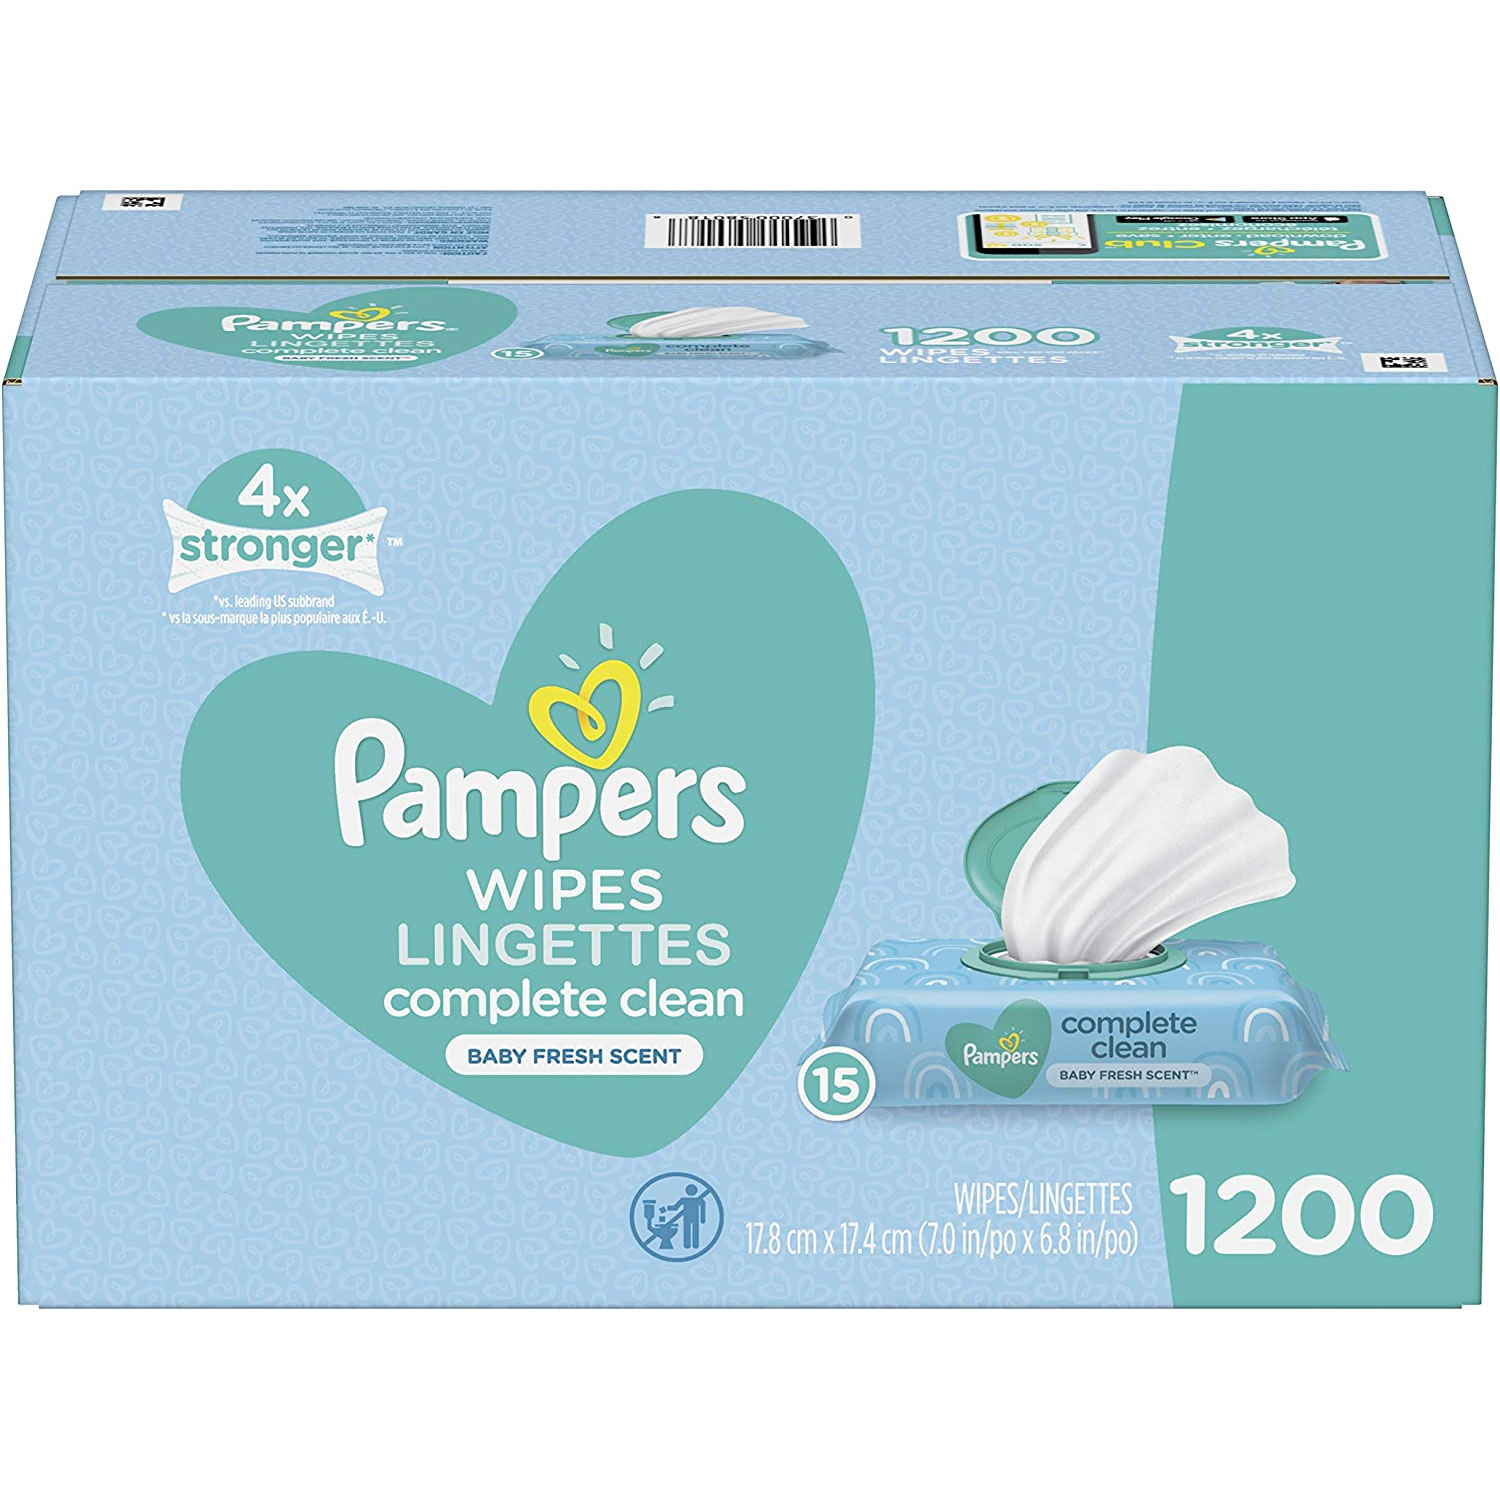 Amazon：Pampers Baby Wipes (1200 count)只賣$19.98